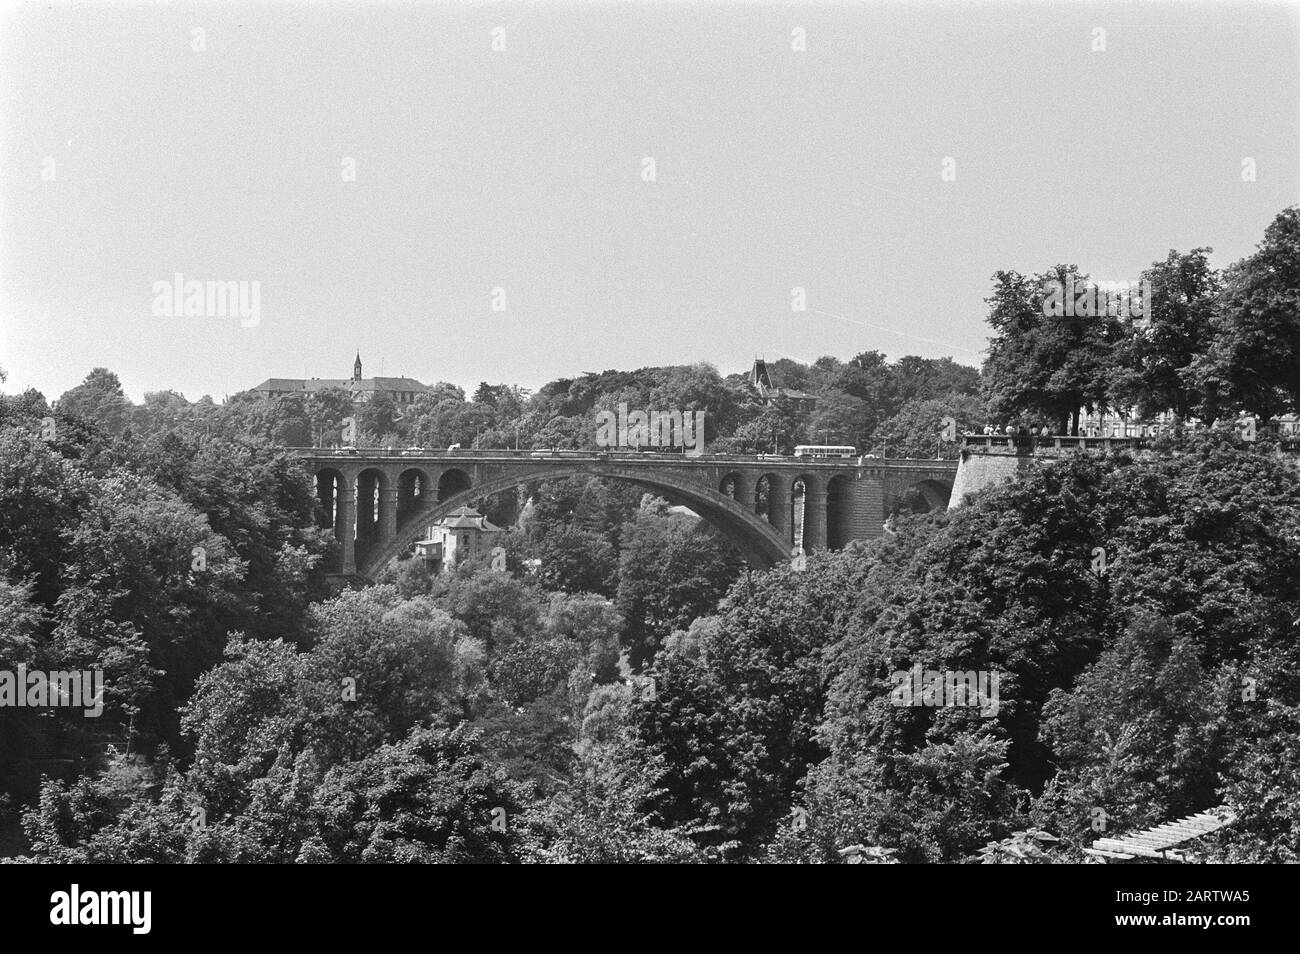 Townscapes Luxembourg, nr. 19A Viaduc about Vallee de la Petrusse, nr. 21, 22 Vallee de la Petrusse Date: 7 July 1971 Location: Luxembourg Keywords: Cityscapes Stock Photo